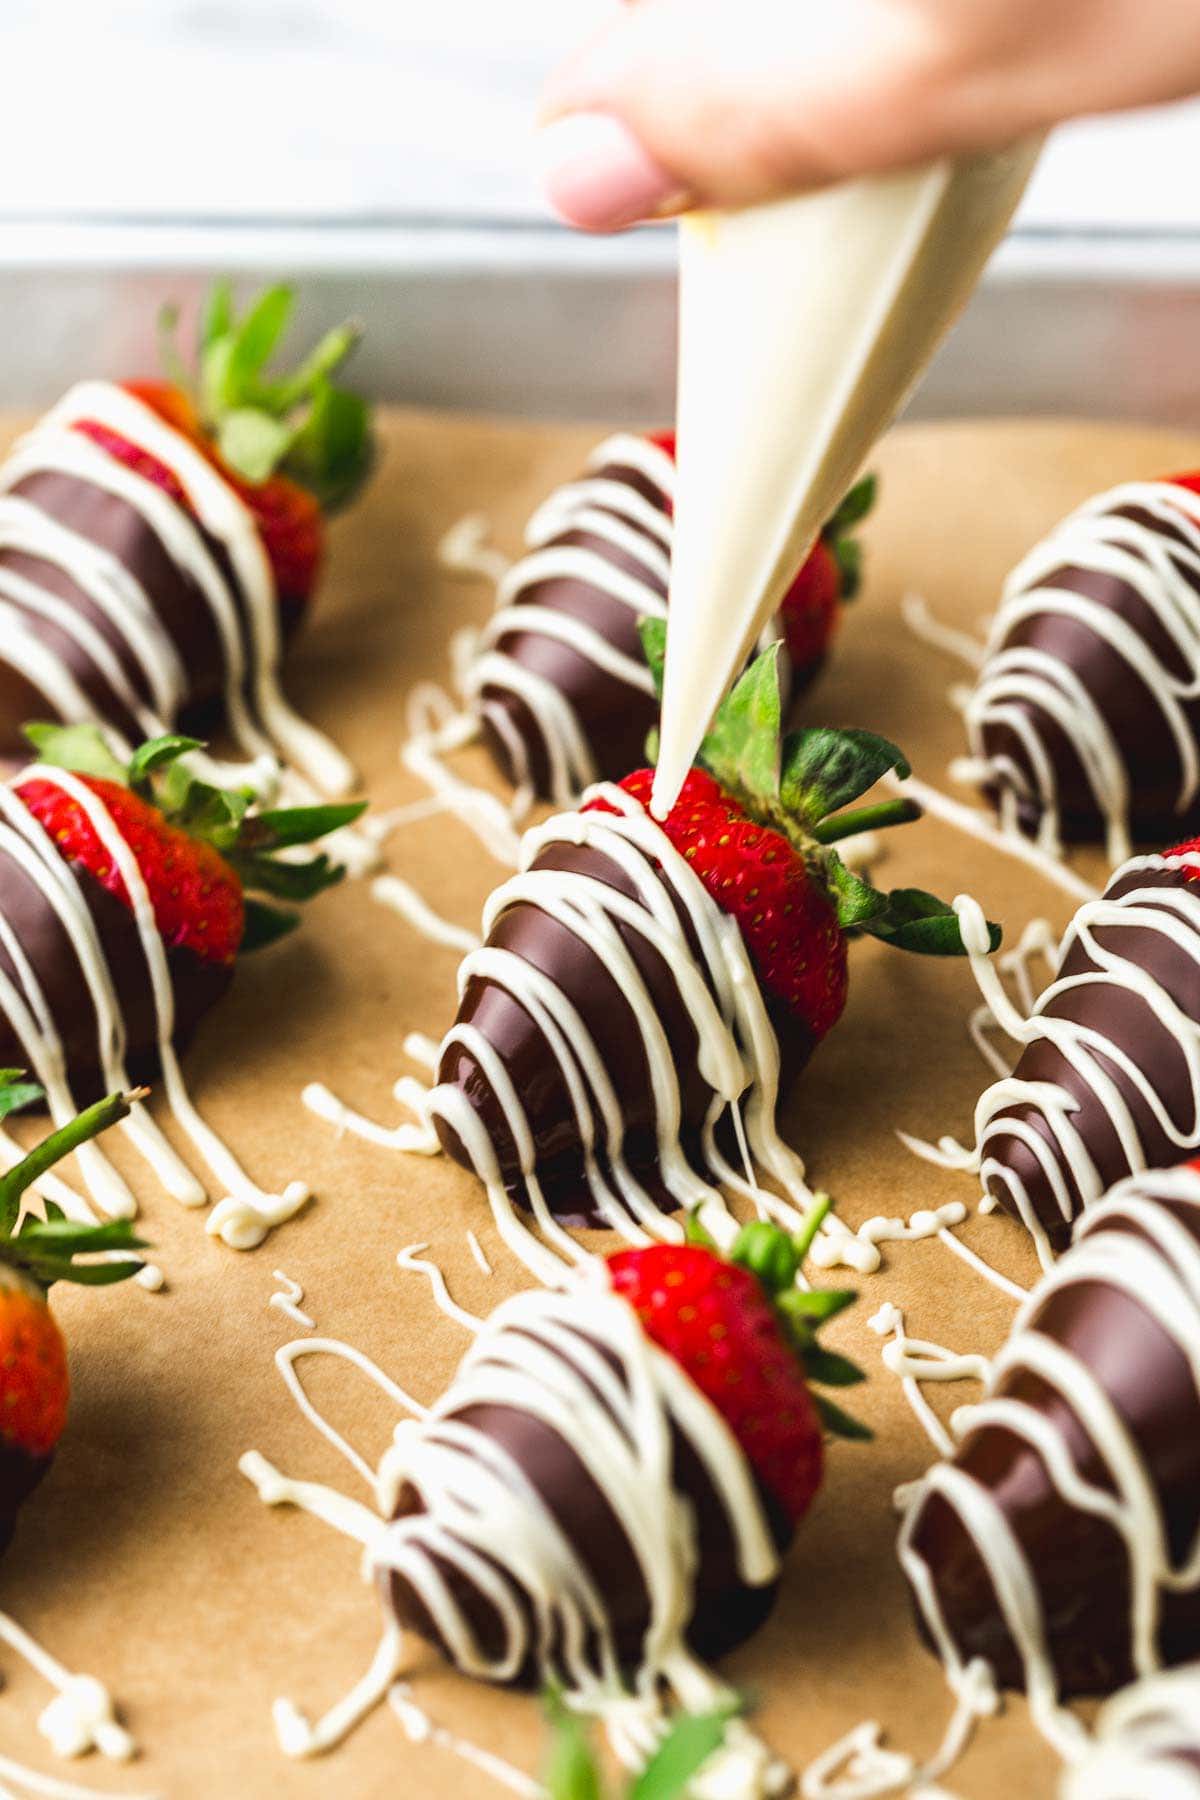 Decorating chocolate strawberries with white chocolate drizzle